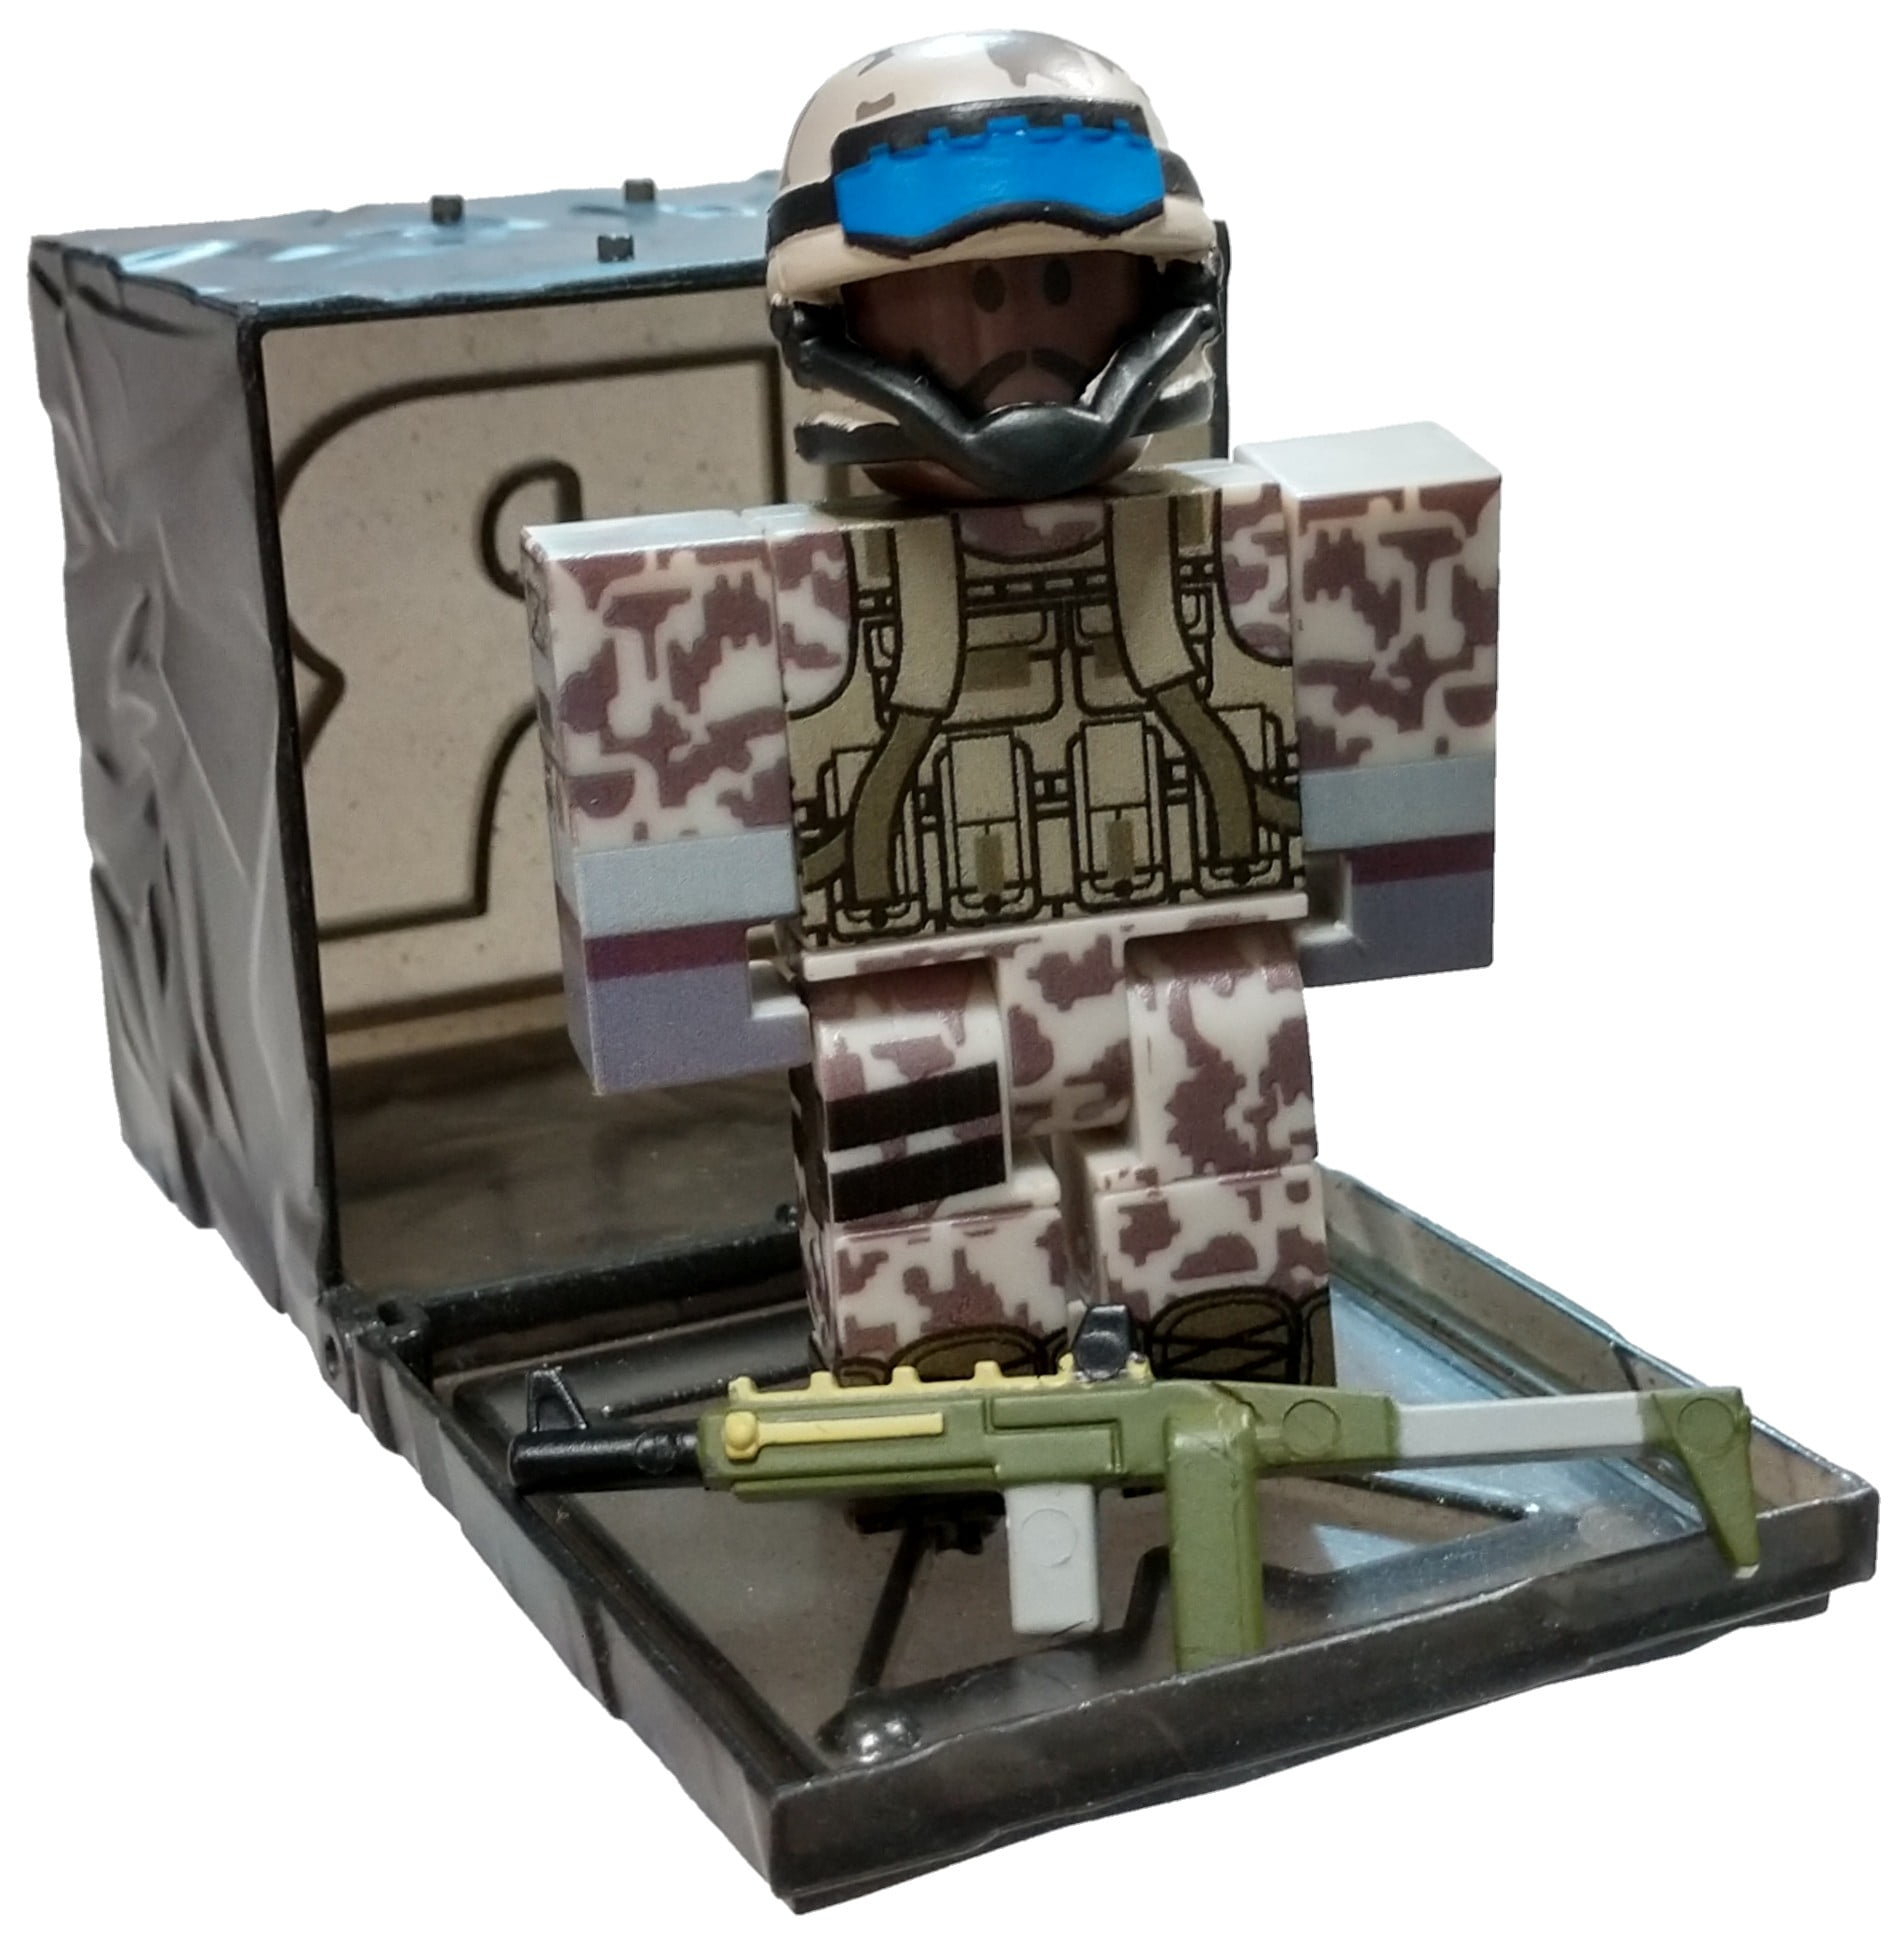 Roblox Series 7 After The Flash Uscpf Soldier Mini Figure With Black Cube And Online Code No Packaging Walmart Com Walmart Com - roblox outfit codes camo